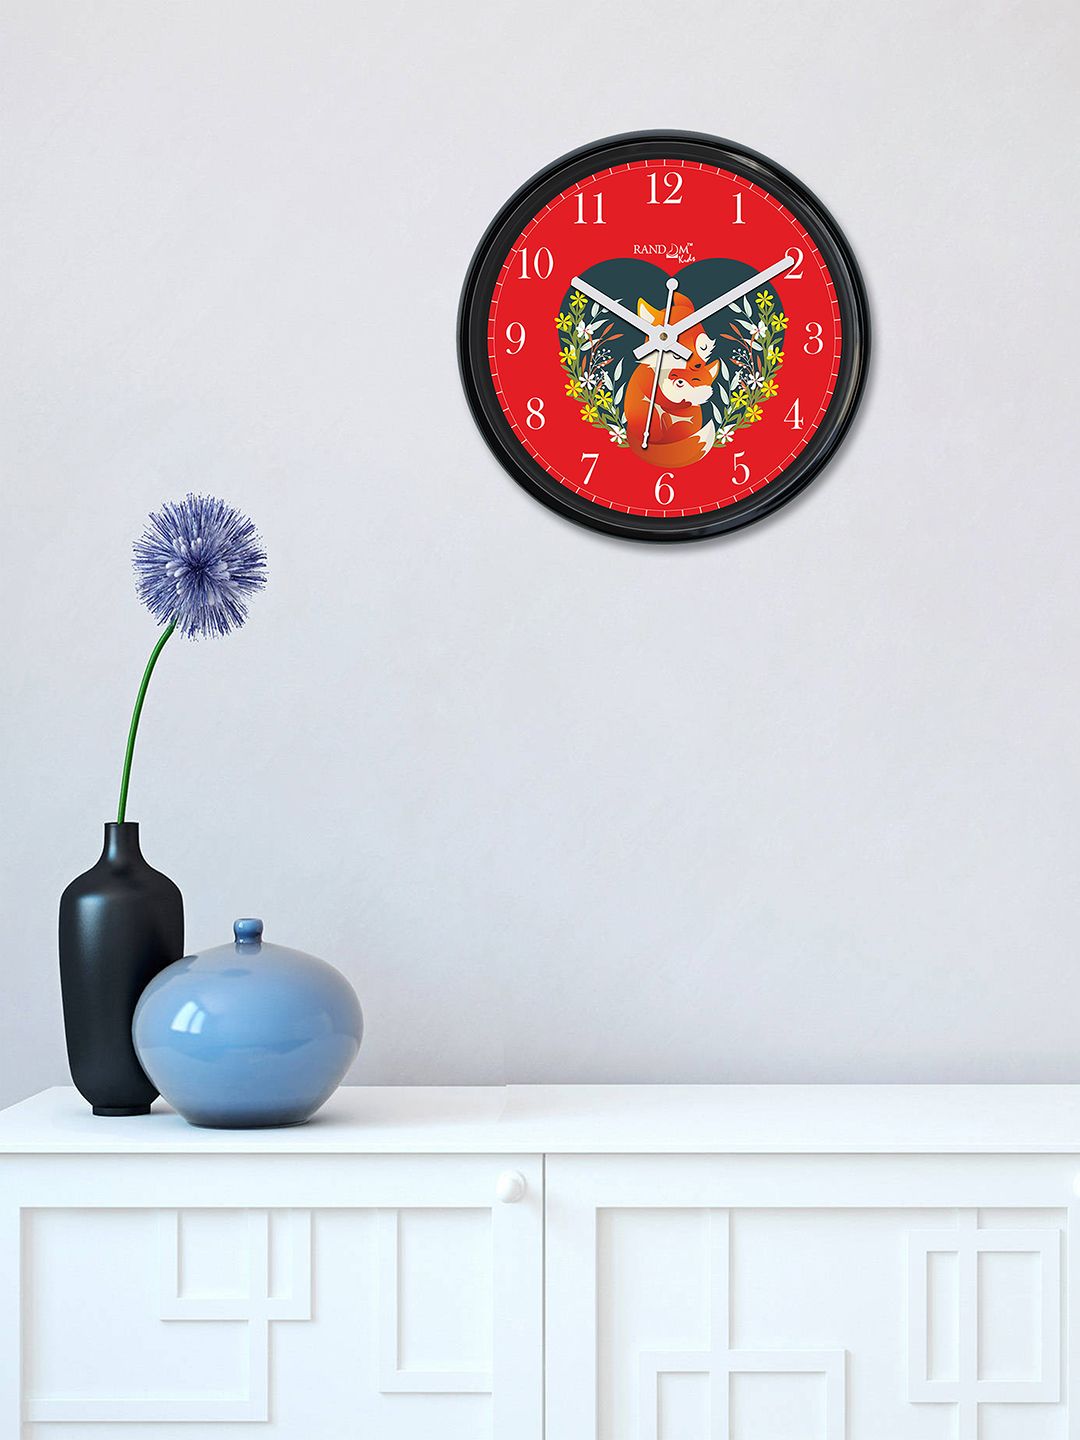 RANDOM Red Round Printed Analogue Wall Clock Price in India